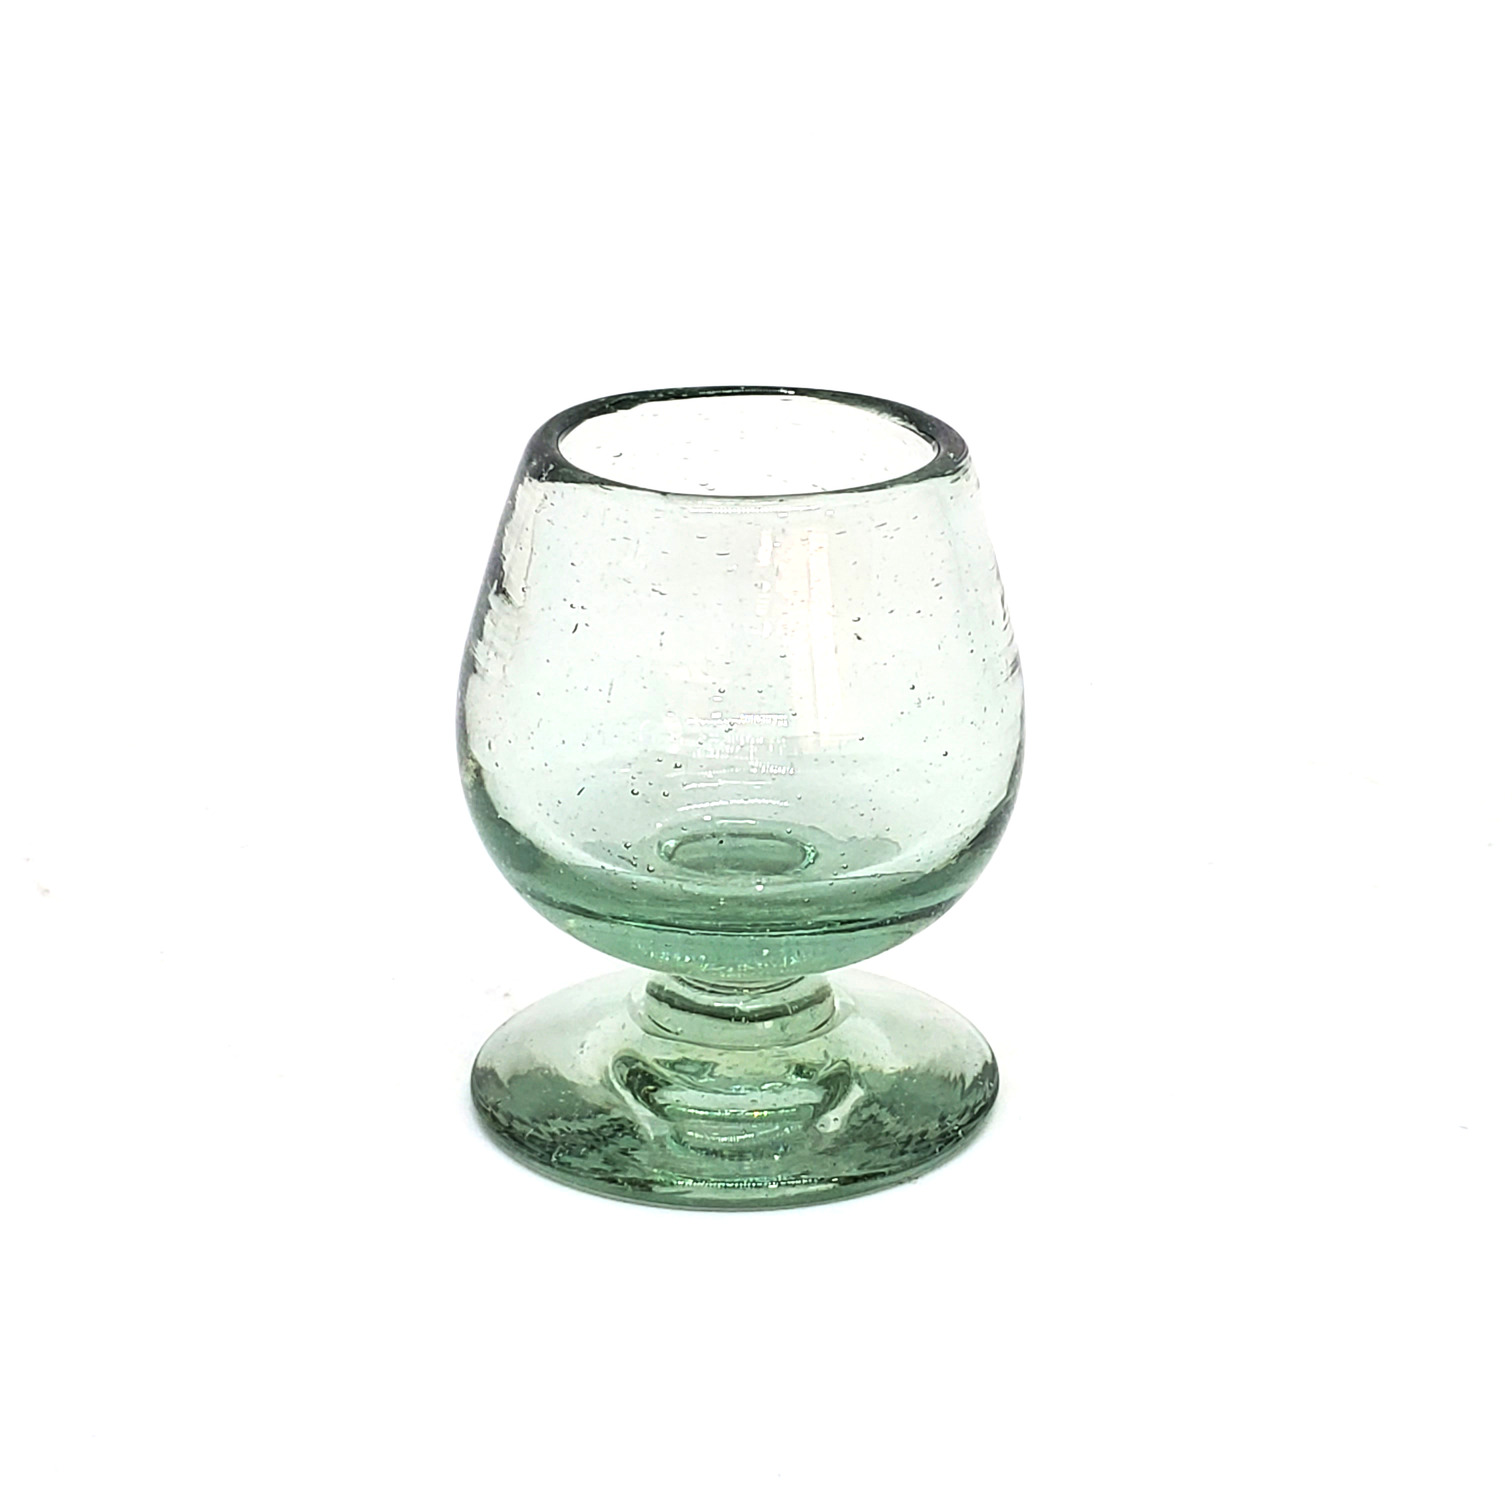 Wholesale MEXICAN GLASSWARE / Clear Tequila Sippers  / Sip your favourite tequila or mezcal with these iconic clear handcrafted sipping glasses. You may also serve lemon juice or other chasers.